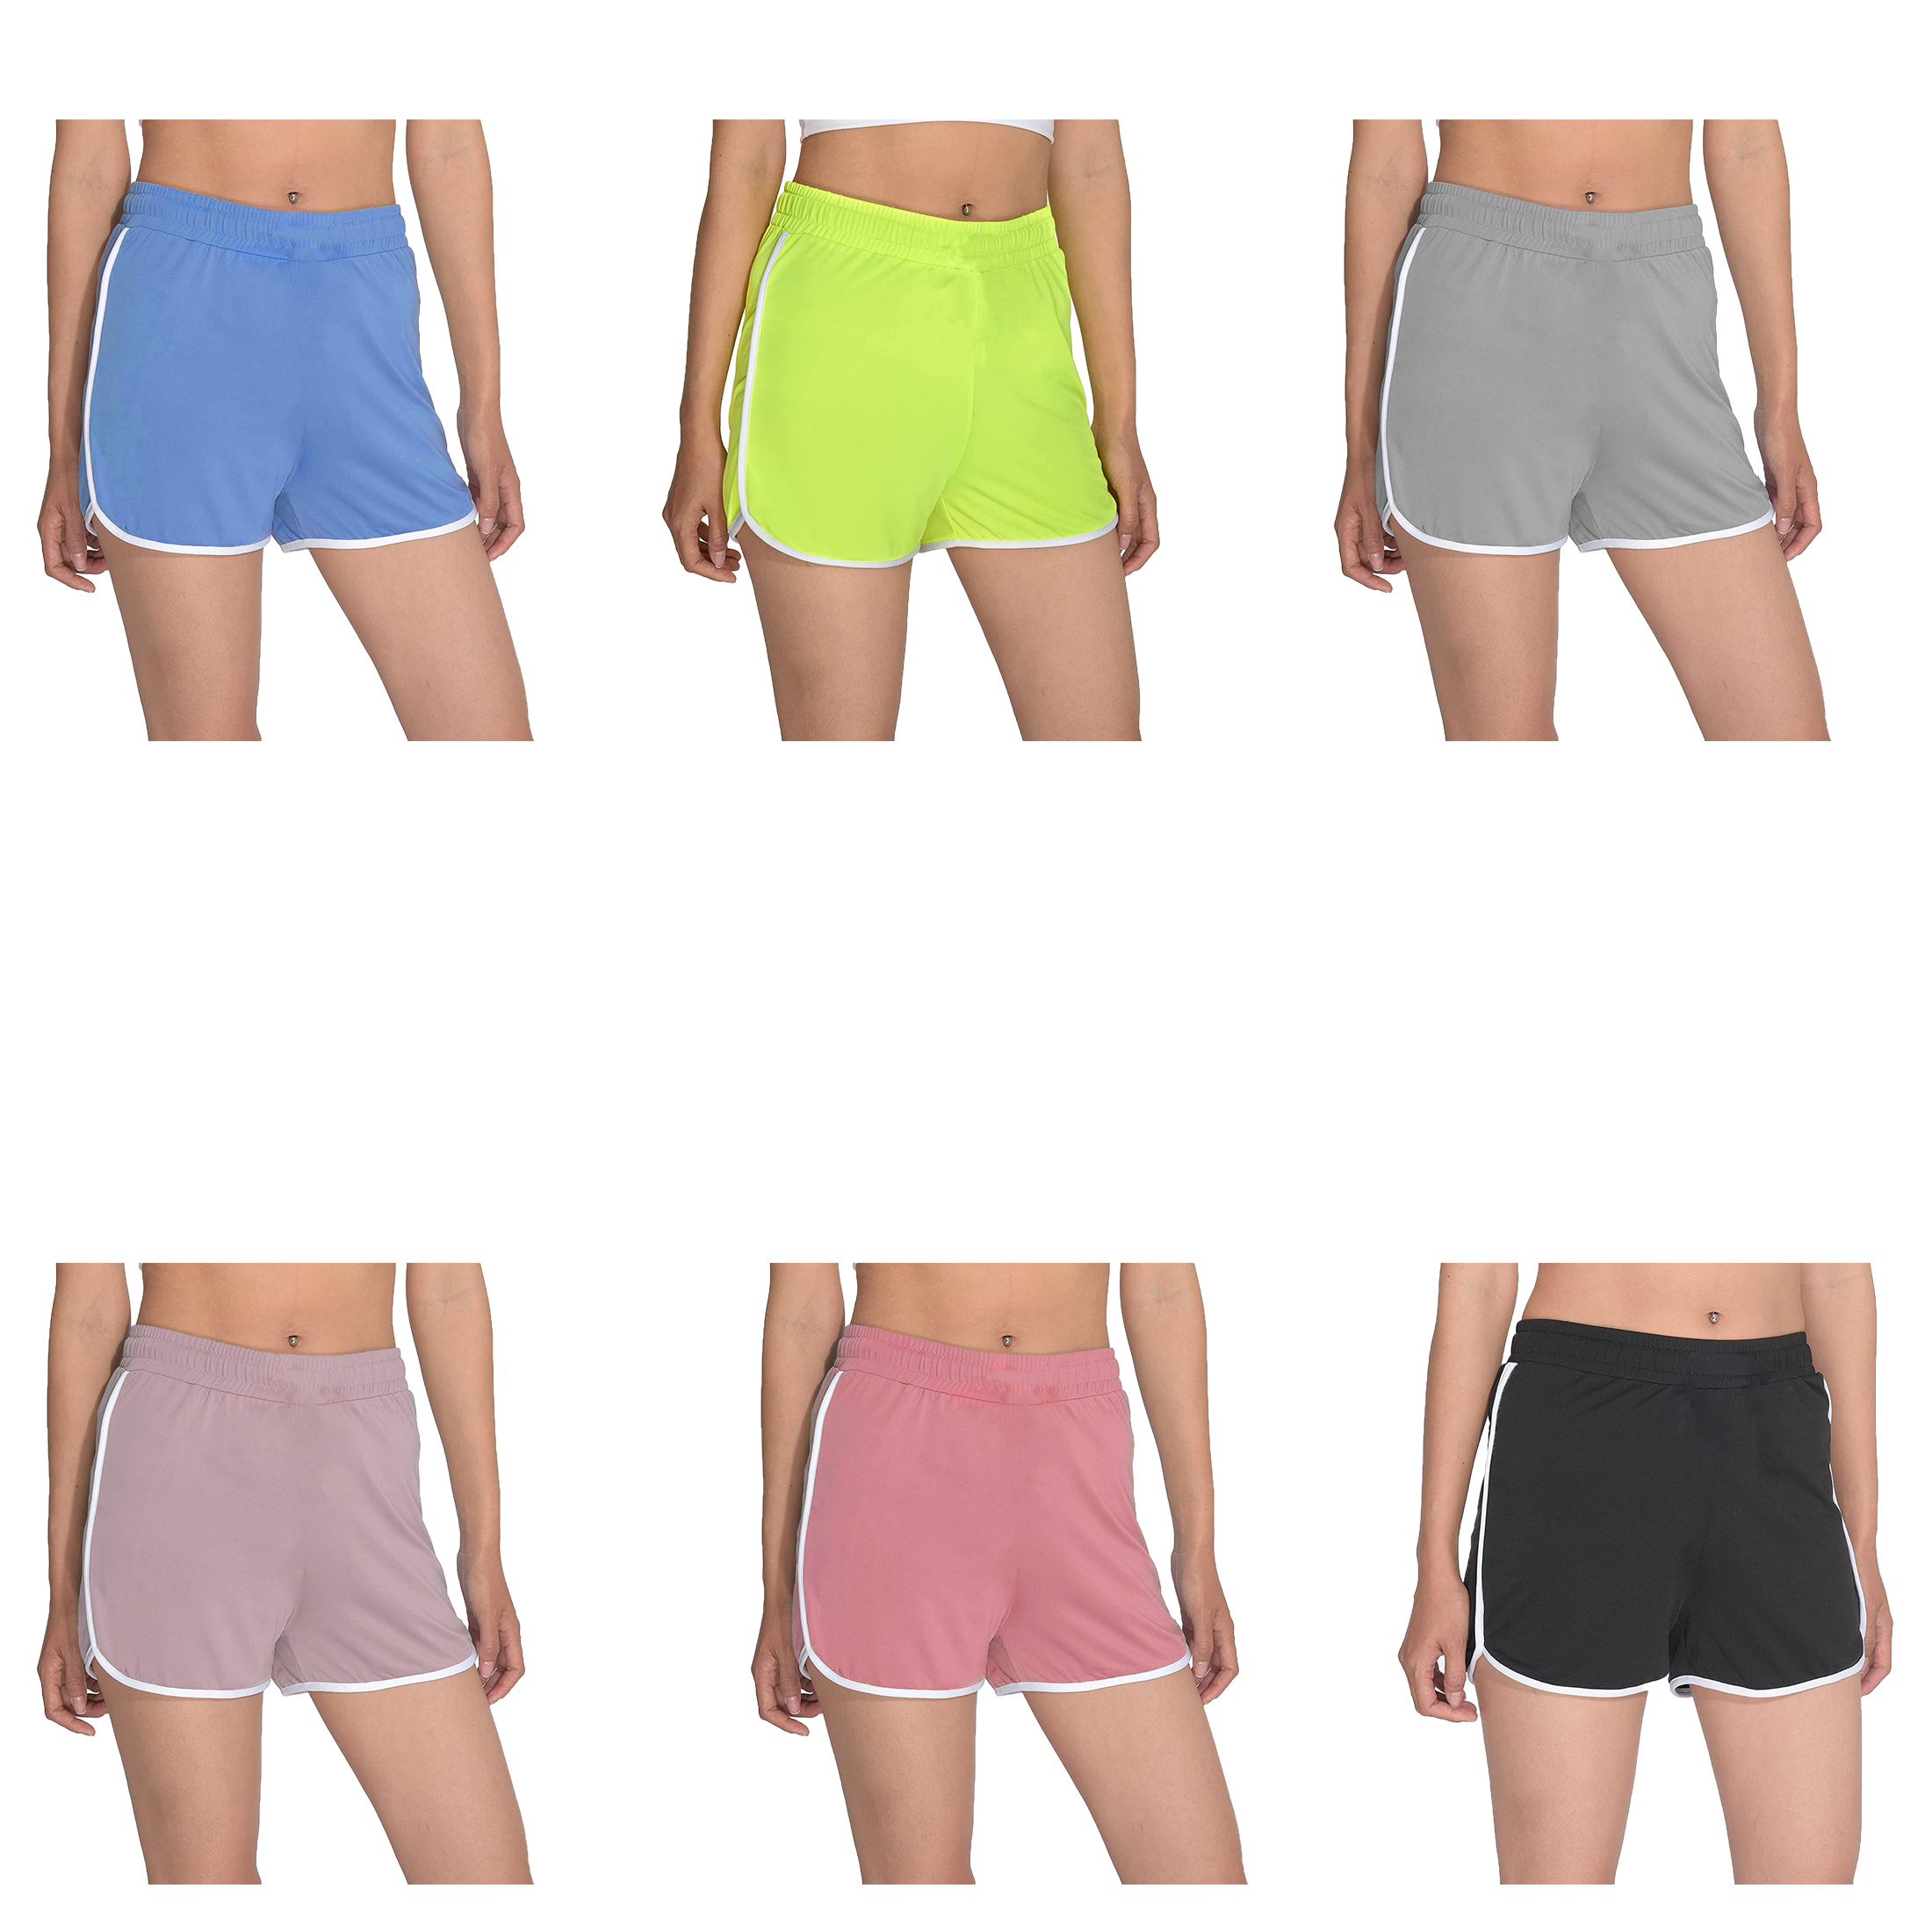 5-Pack Women's Dolphin Shorts Elastic Waist Soft Comfy Running Sporty Athletic Workout Pants - XL